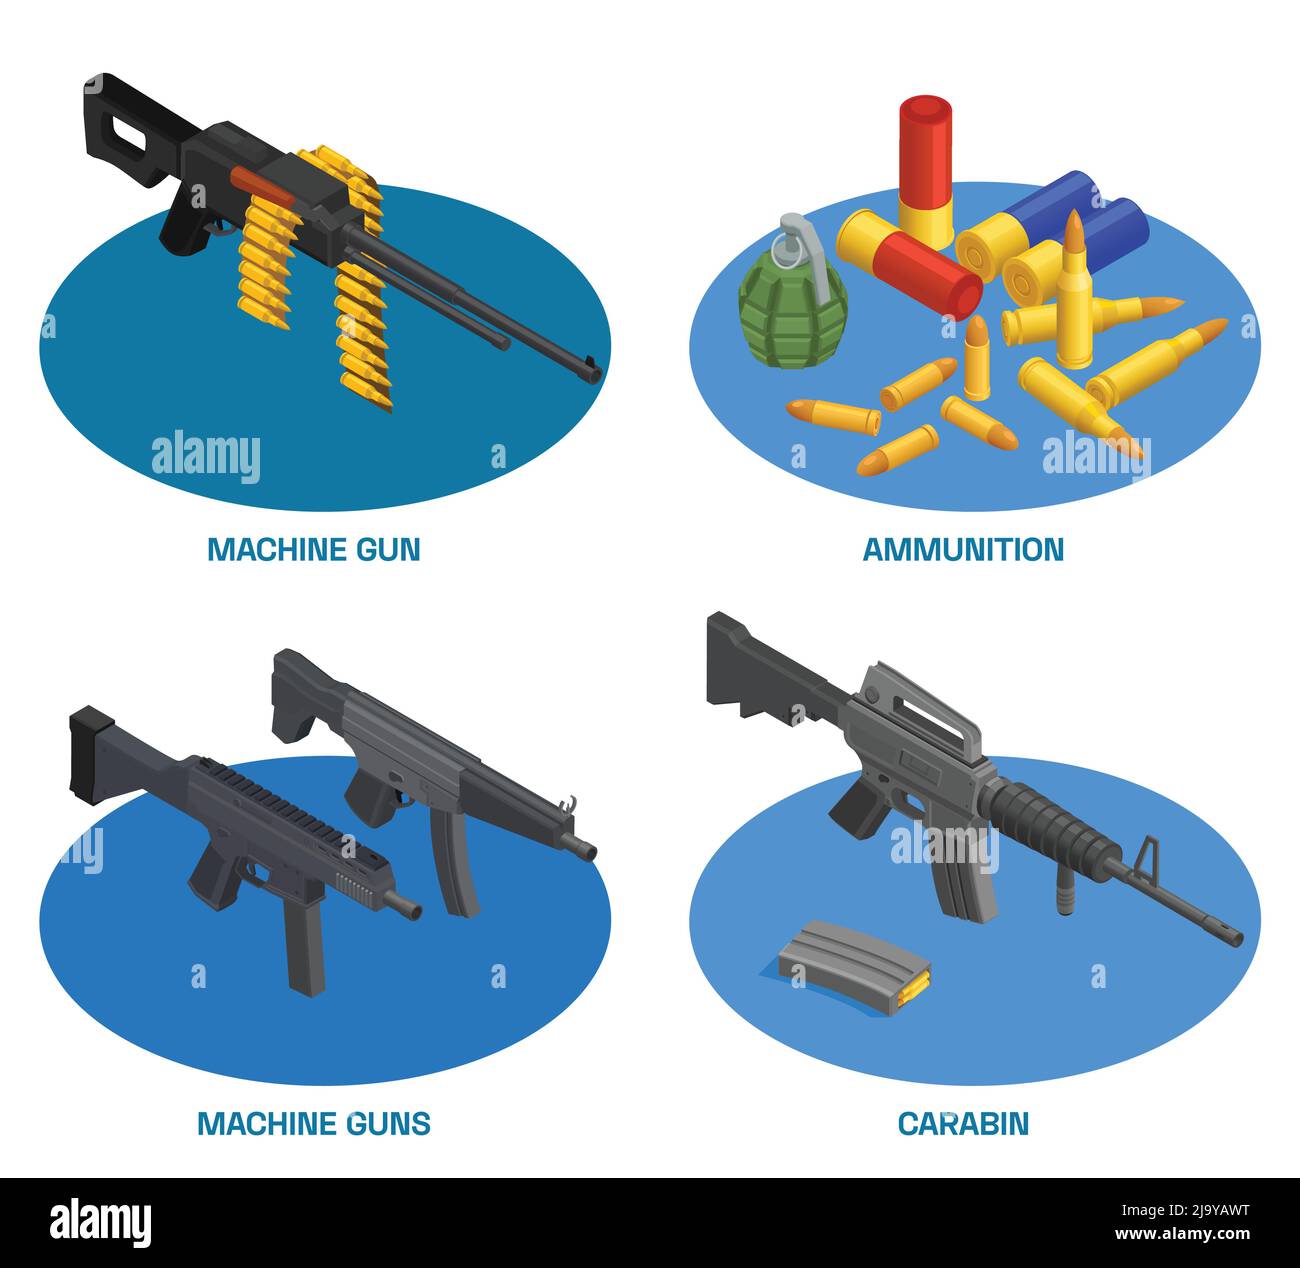 Army weapons soldier isometric set of compositions with text and machine guns carabins with ammunition items vector illustration Stock Vector